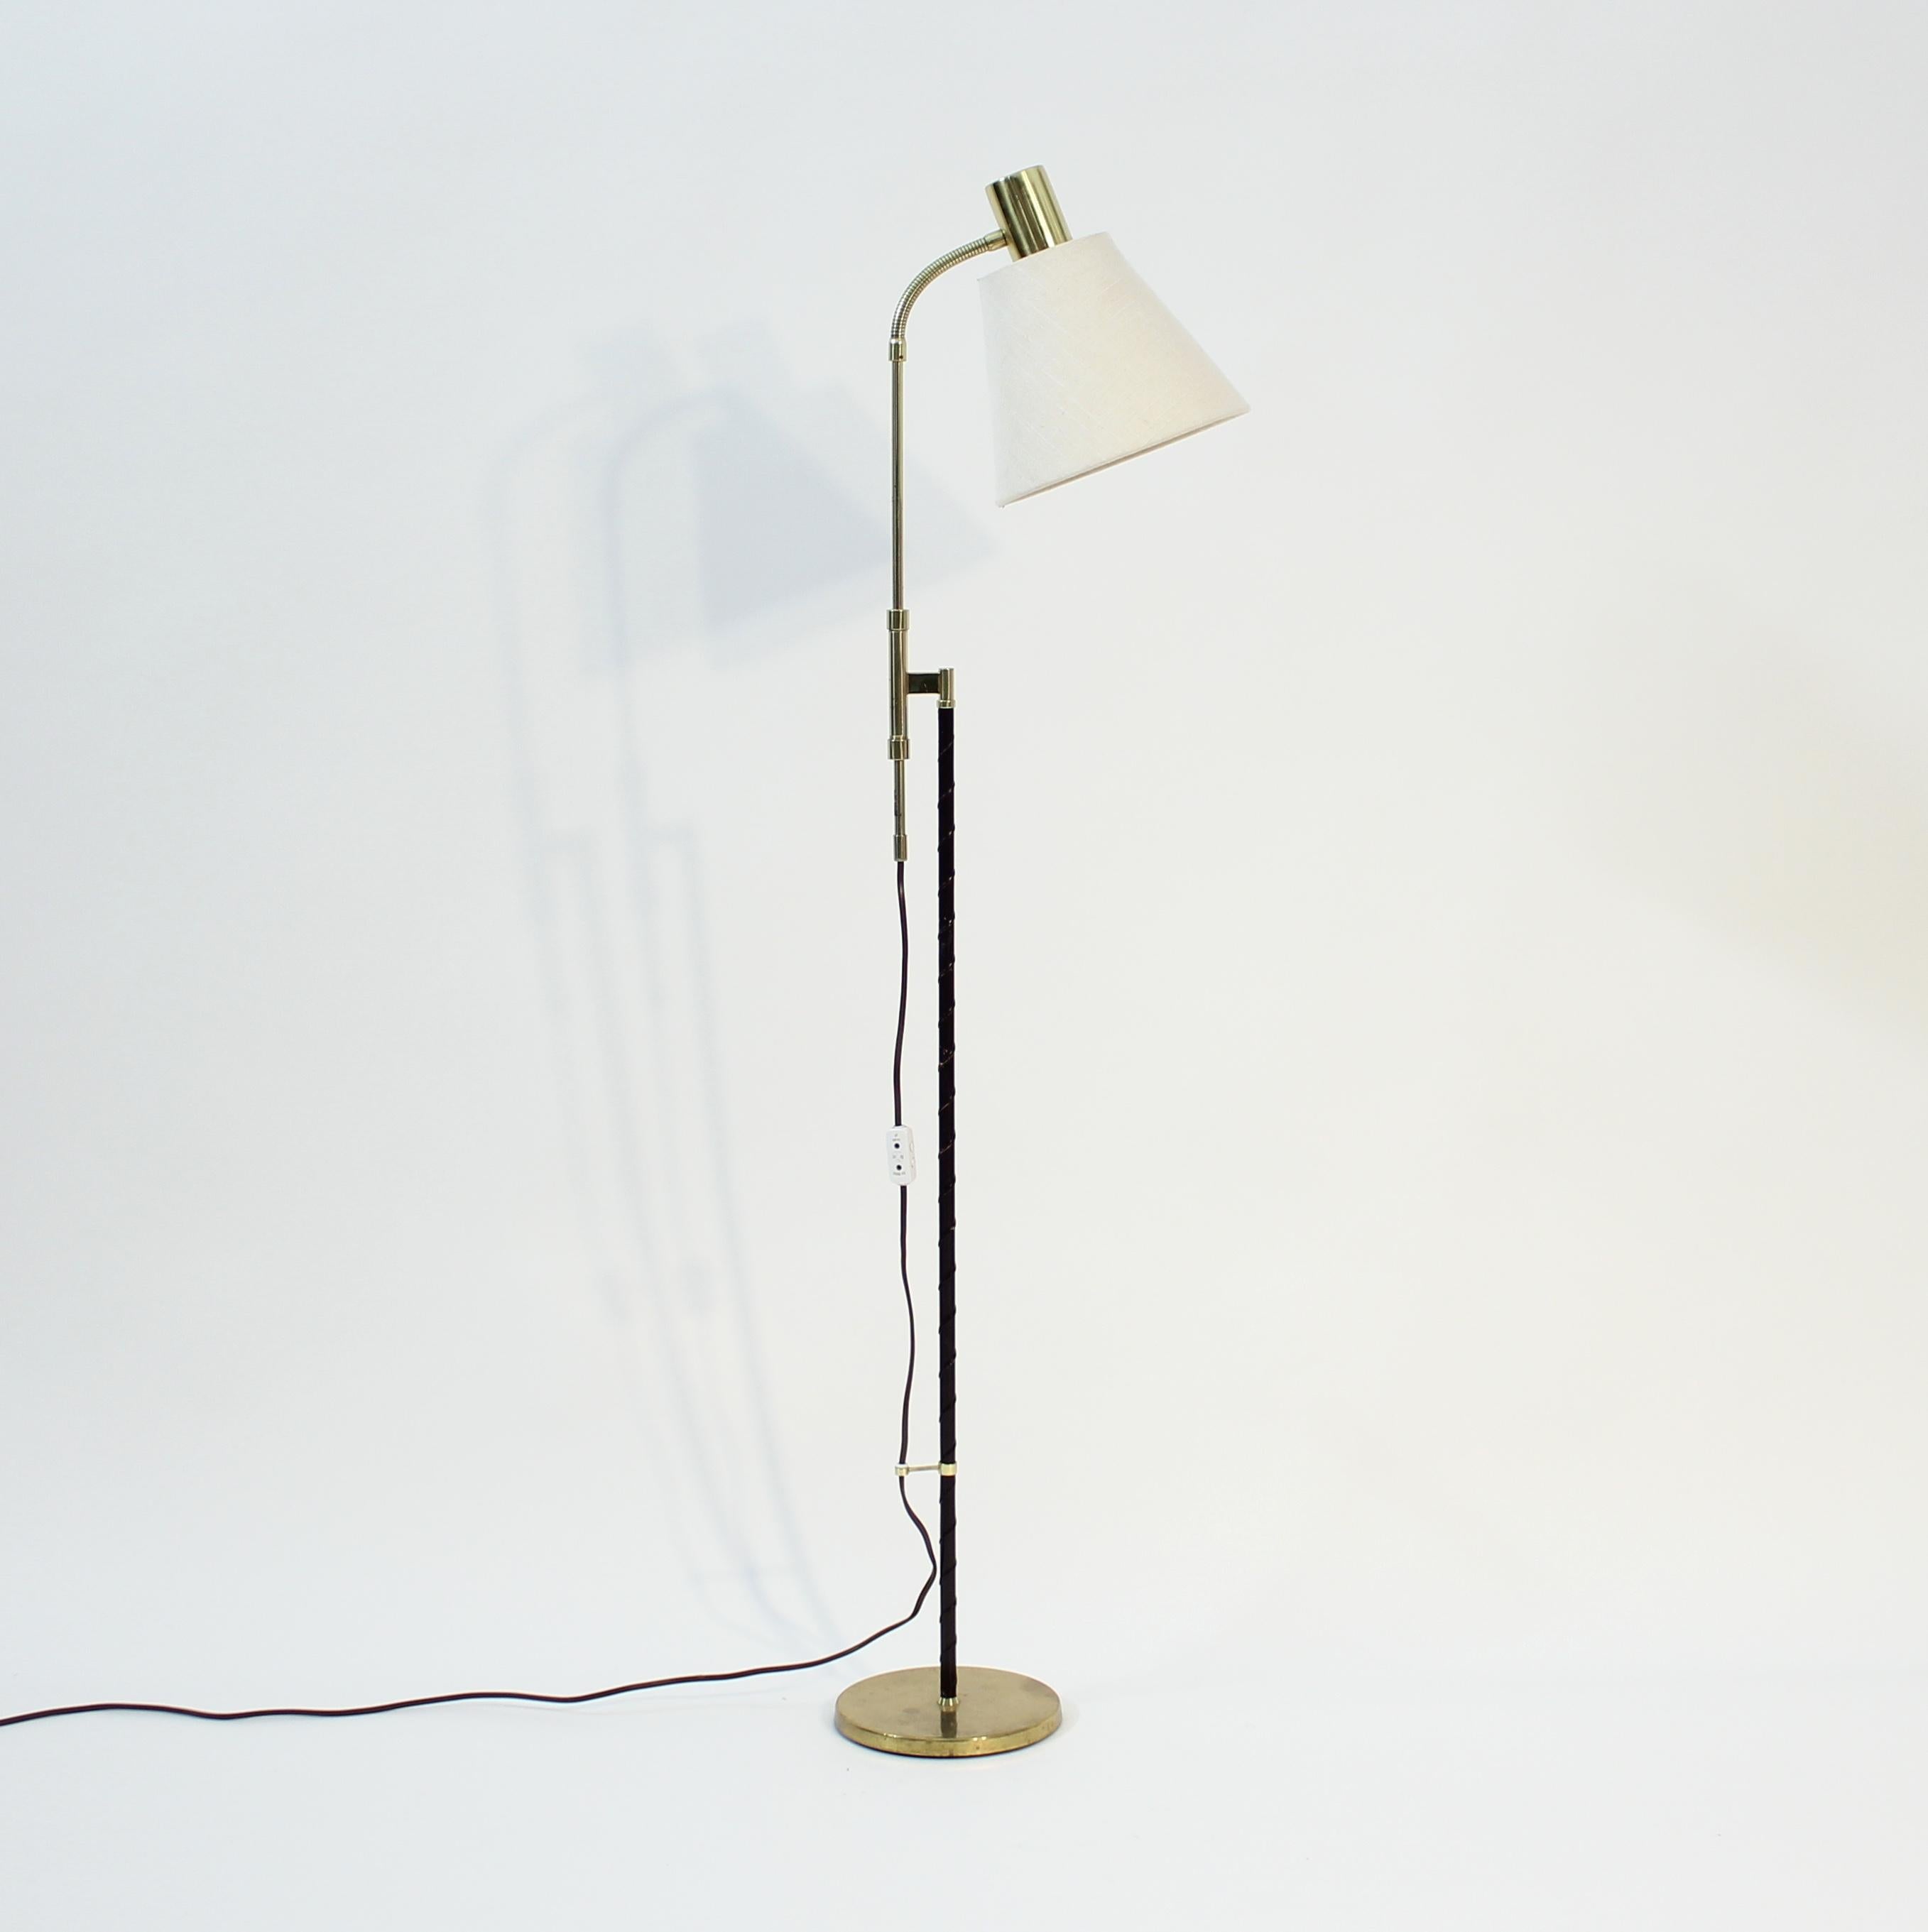 Swedish mid-century floor lamp by MAE (Möller Armatur Eskilstuna) with a leather covered brass stem on a round brass base. Off-white fabric shade. Height adjustable between 112-138 cm. Good vintage condition with light ware consistent with age and